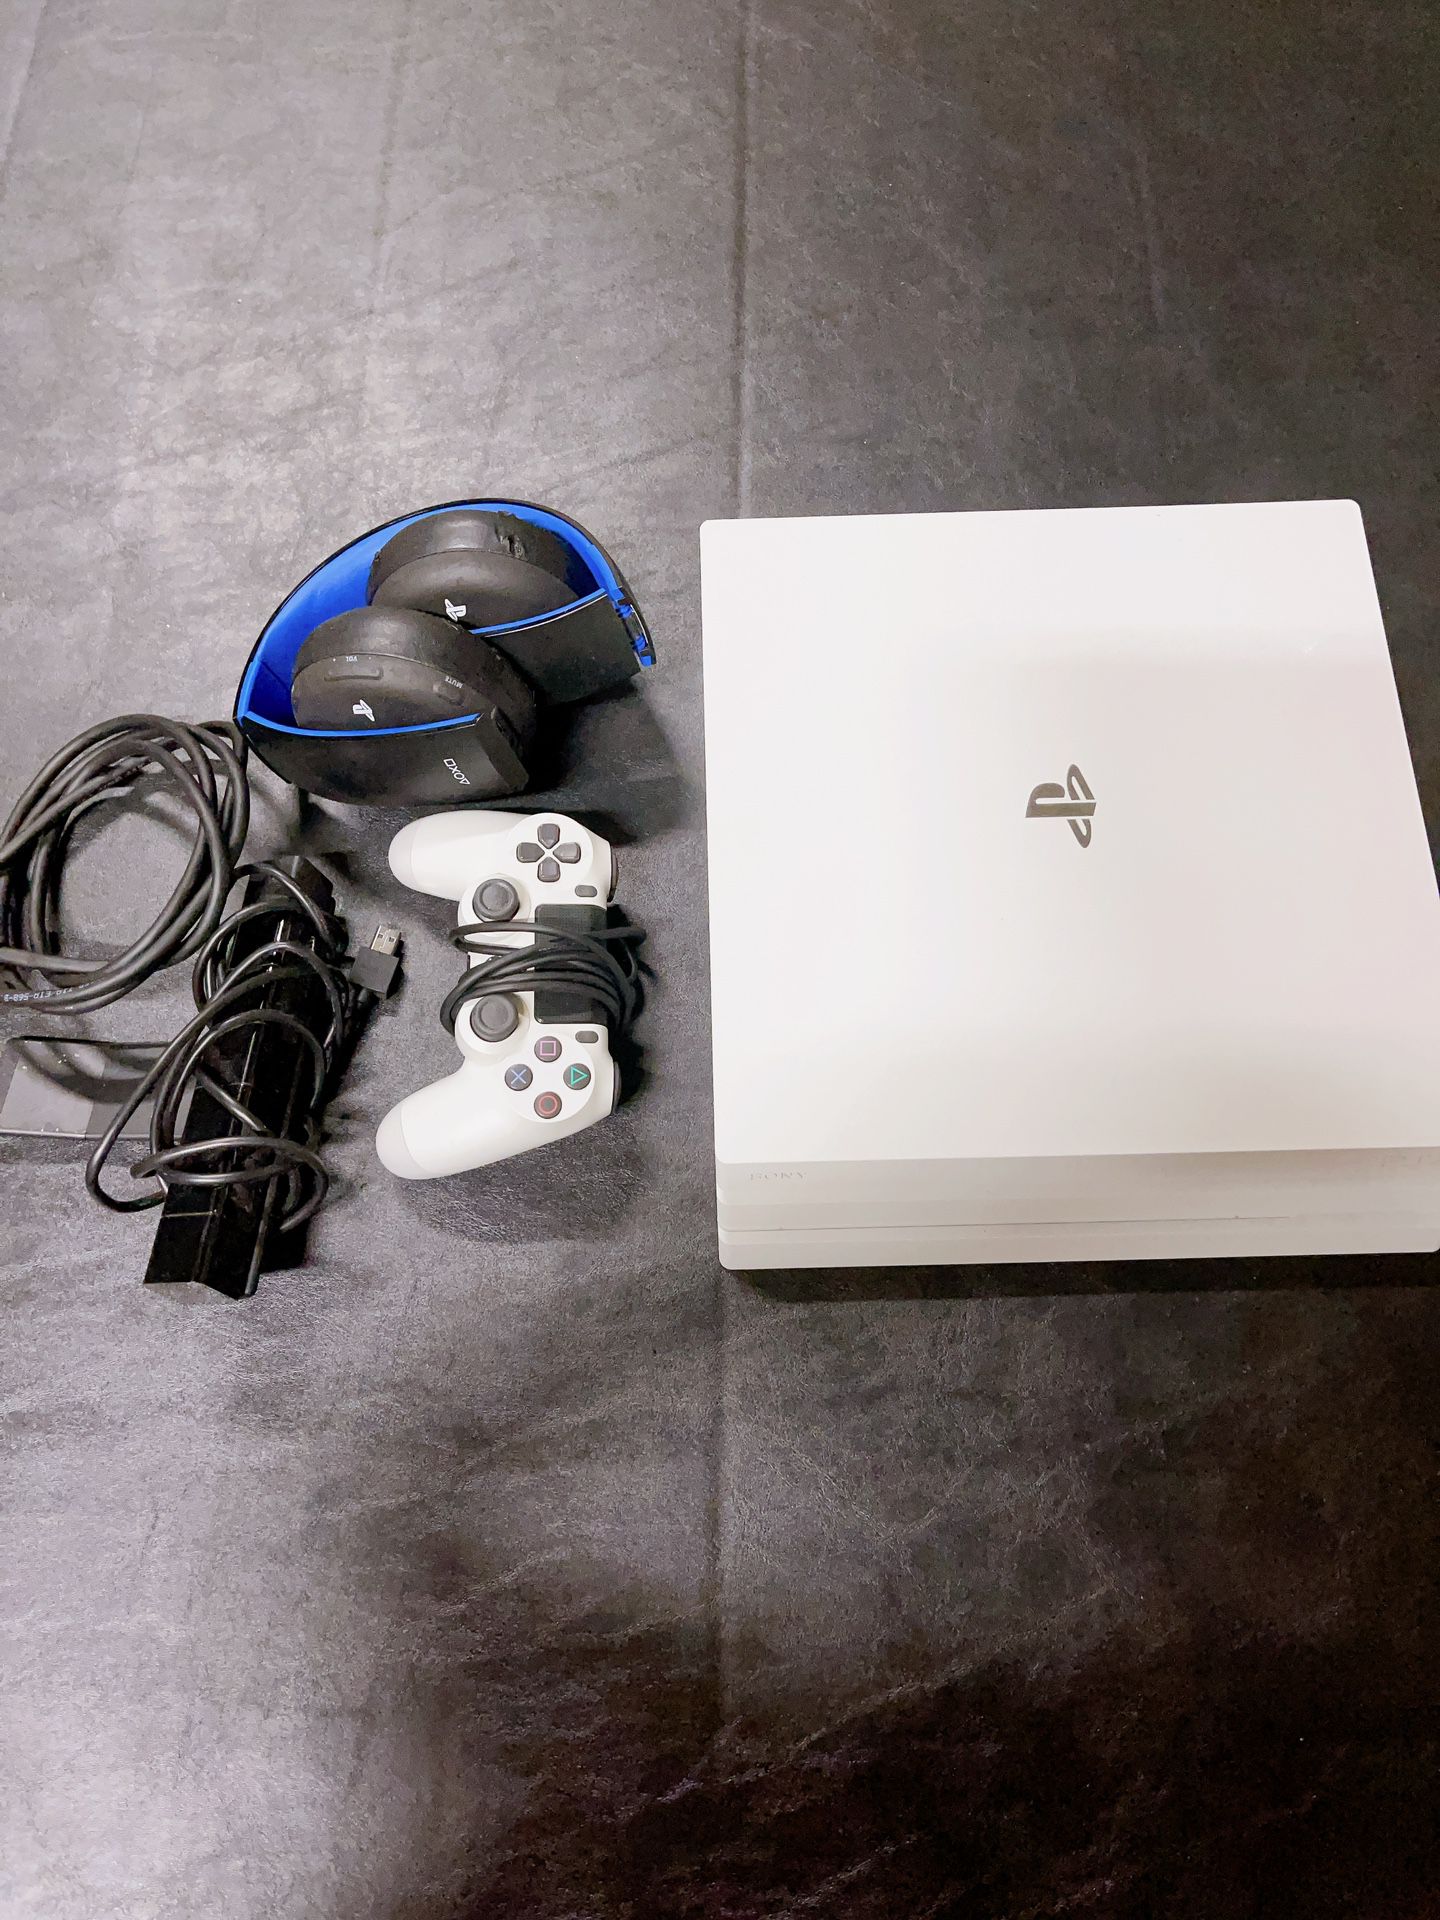 PS4 (with Controller, Wireless Headphone, Camera)